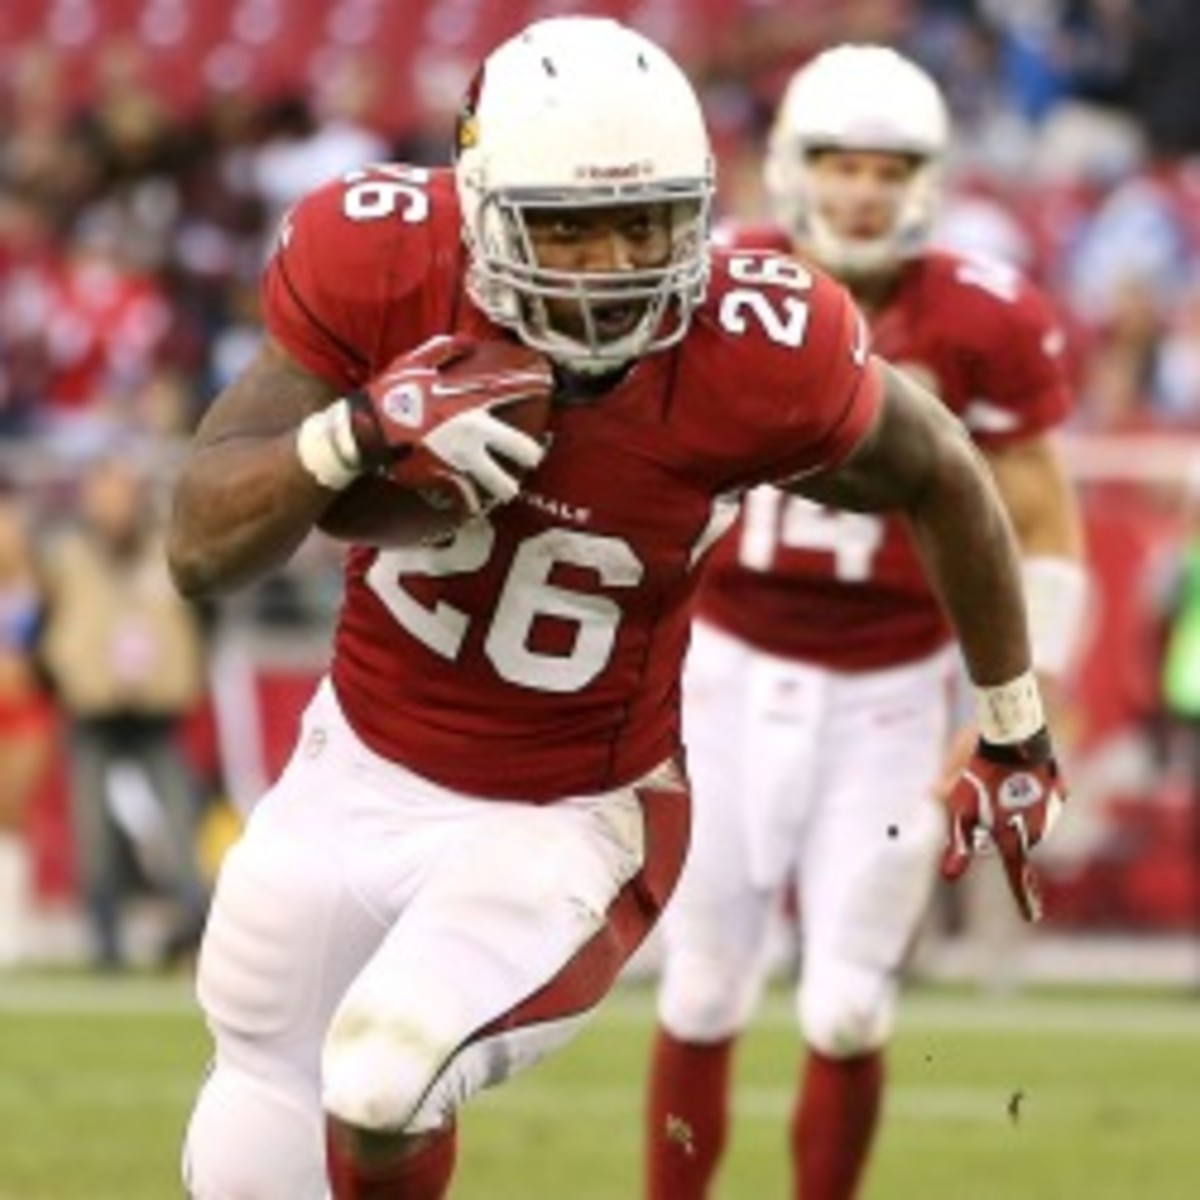 The Cardinals cut oft-injured back Beanie Wells, saving $1.5 million in cap space. (Christian Petersen/Getty Images)